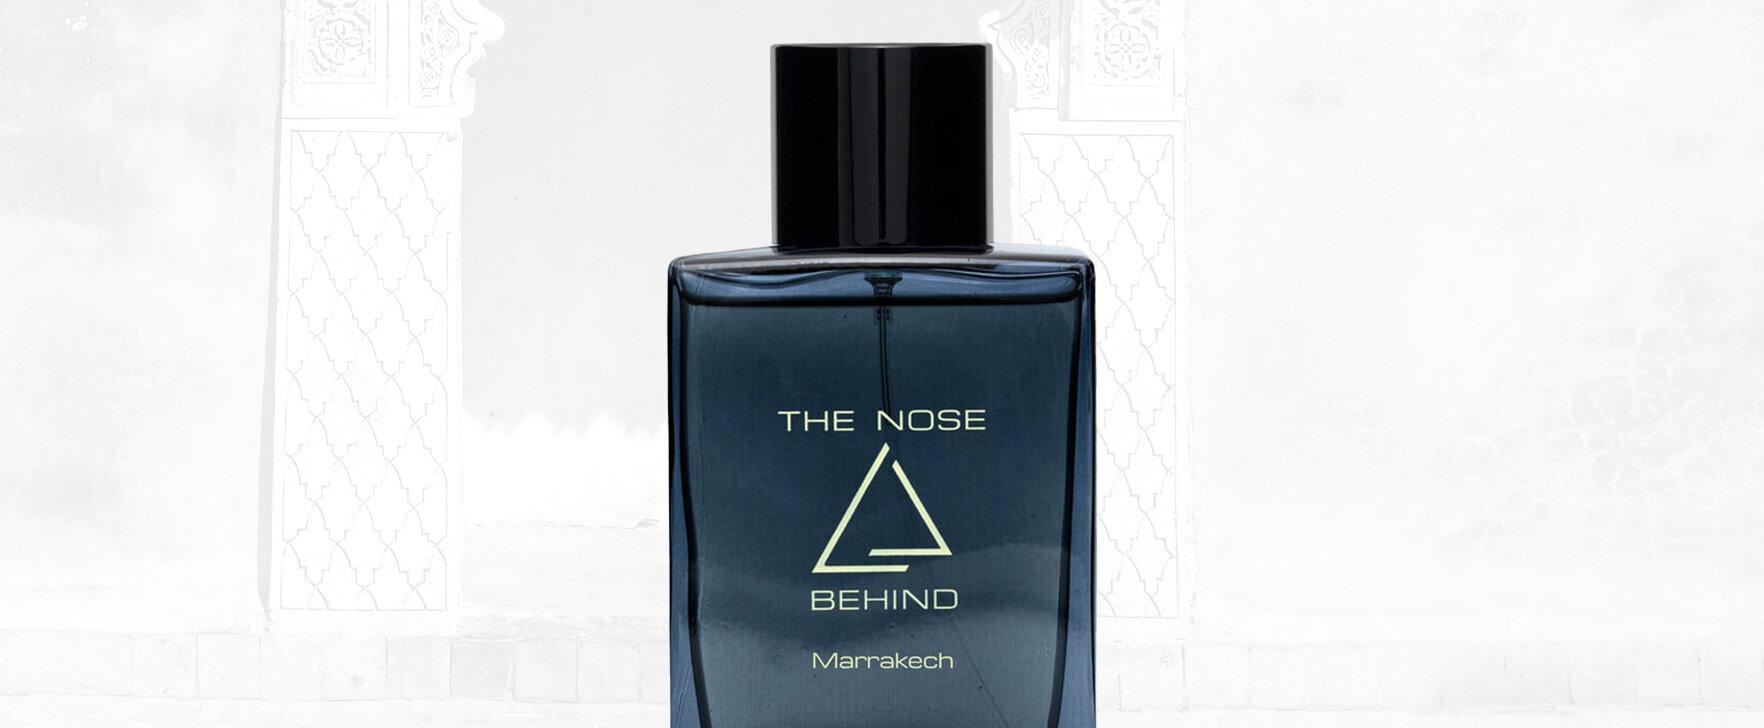 The Essence of the Red City: The Extrait de Parfum "Marrakech" by the Nose Behind